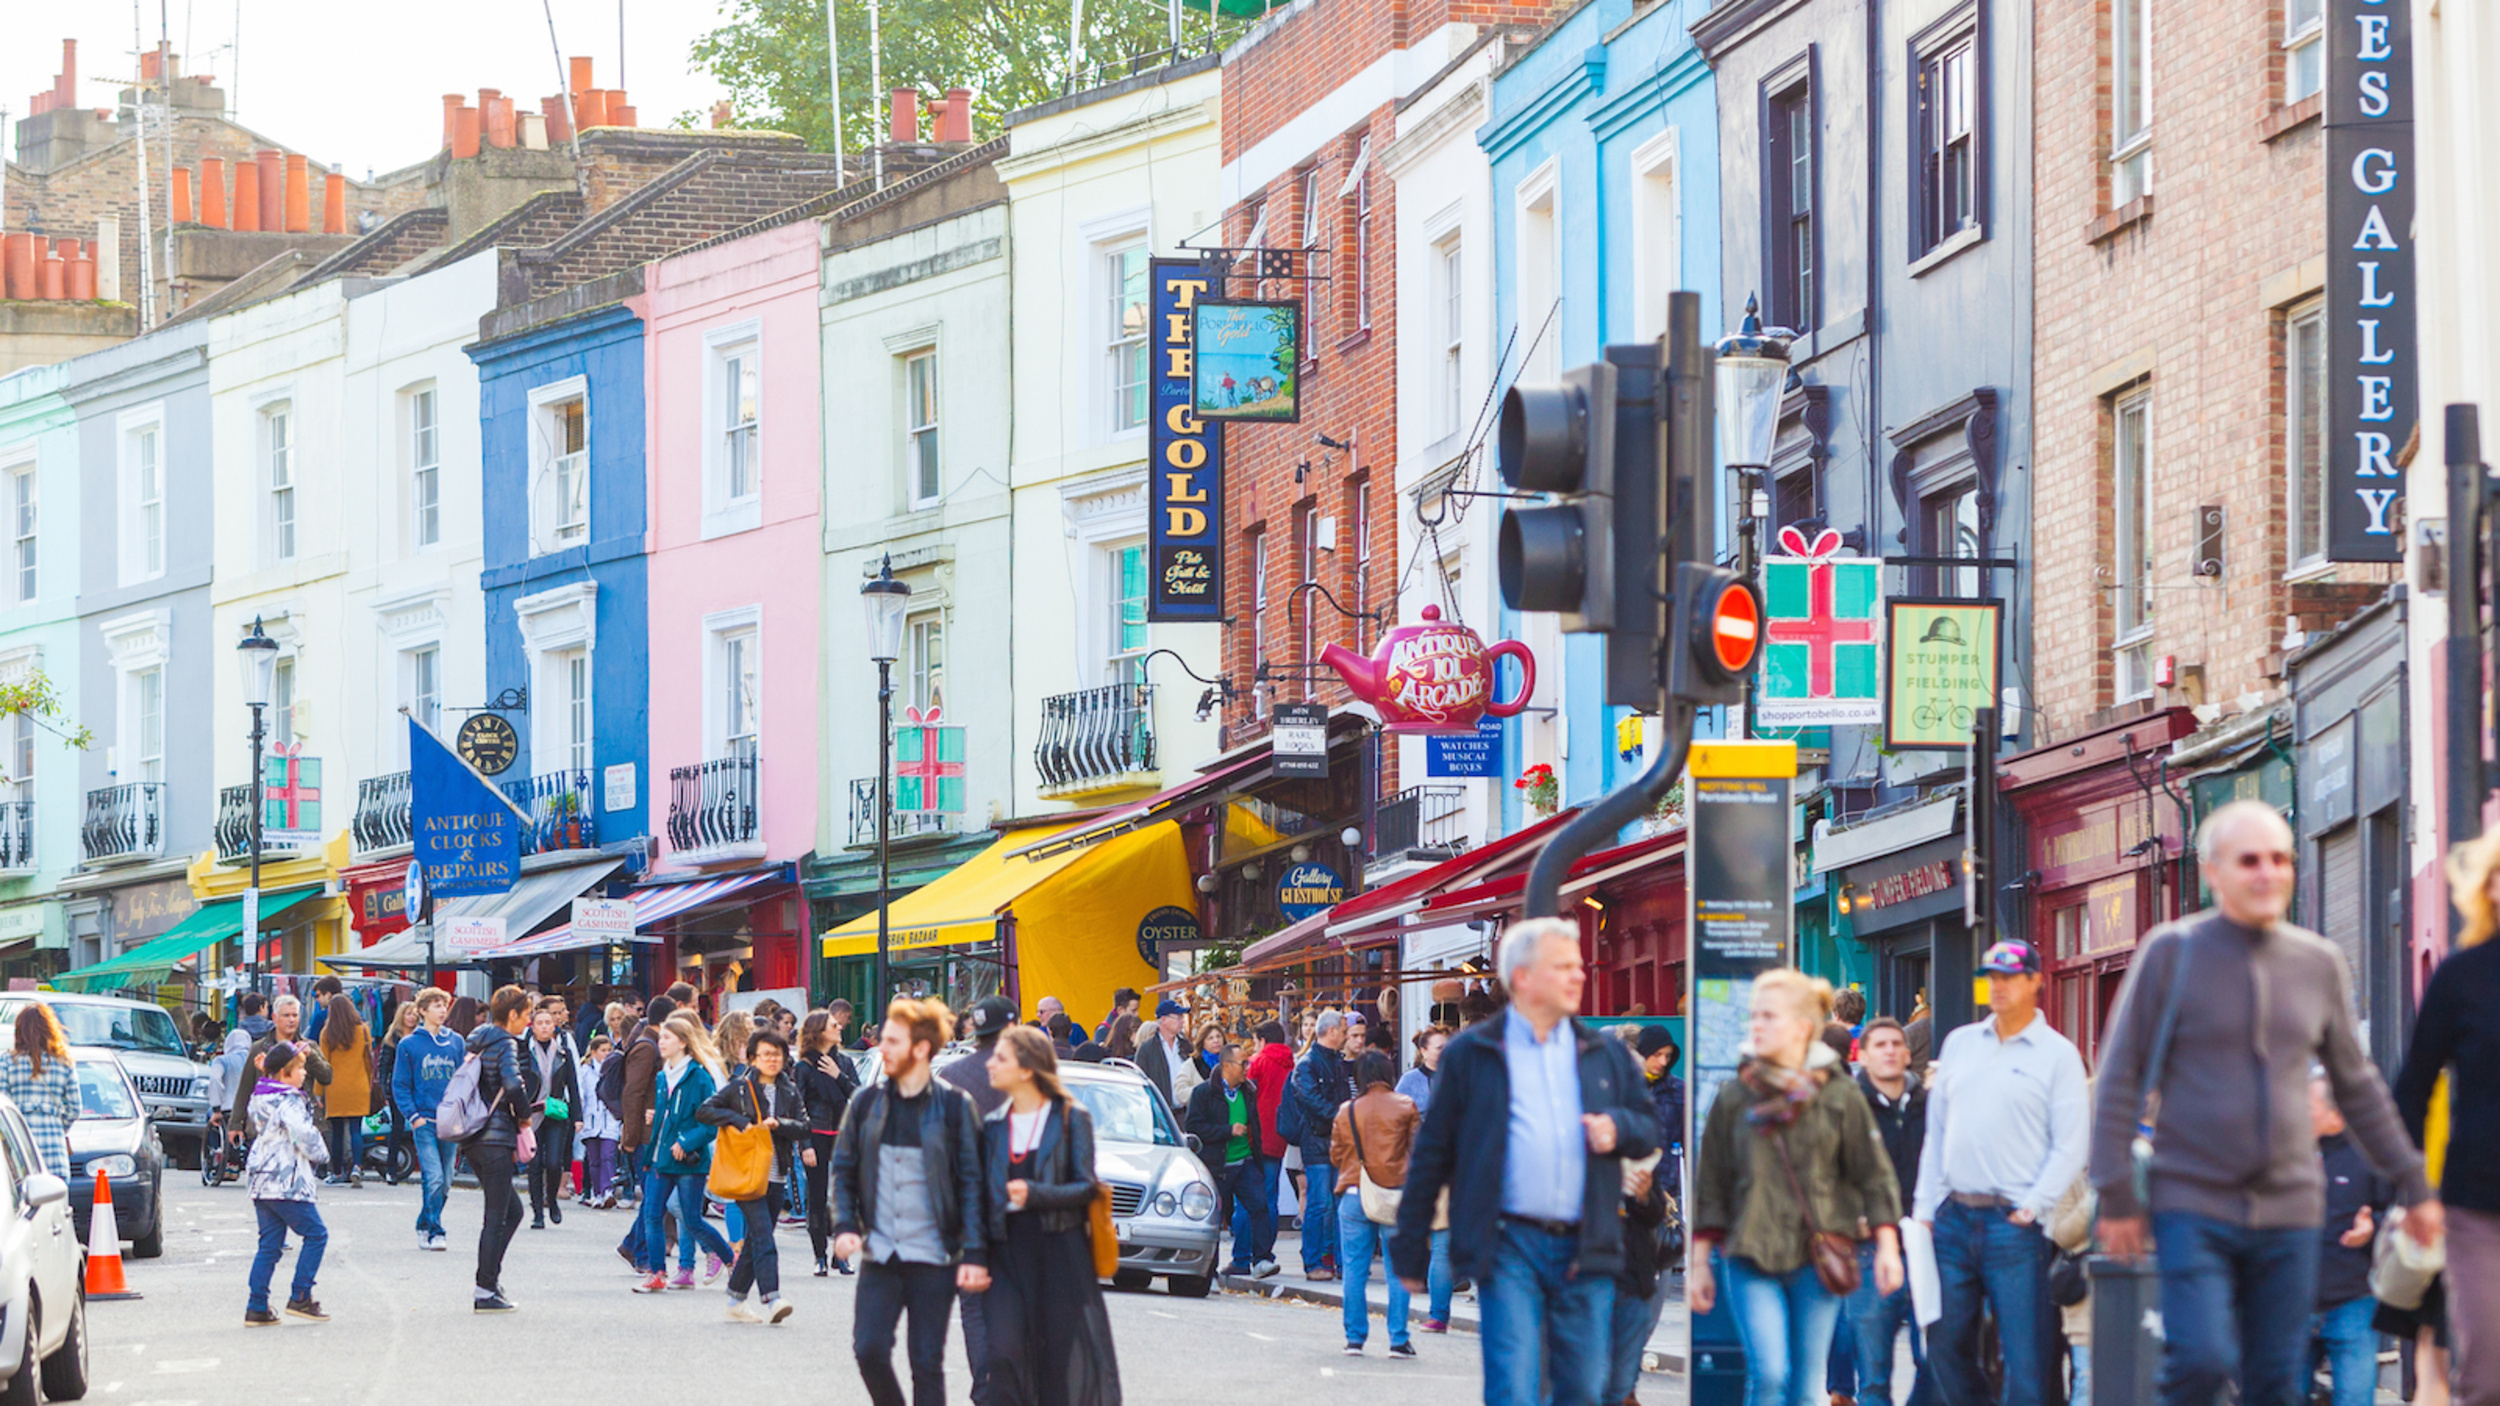 <p><span><span>I don't know what's more famous: Notting Hill or <em>Notting Hill</em>? Both the movie and the place attract loads of tourists, though it's the market on Portobello Road that is more famous than both combined. </span></span></p><p>You may also like: <a href='https://www.yardbarker.com/lifestyle/articles/the_20_foods_that_have_the_most_vitamin_c_031524/s1__35739191'>The 20 foods that have the most vitamin C</a></p>